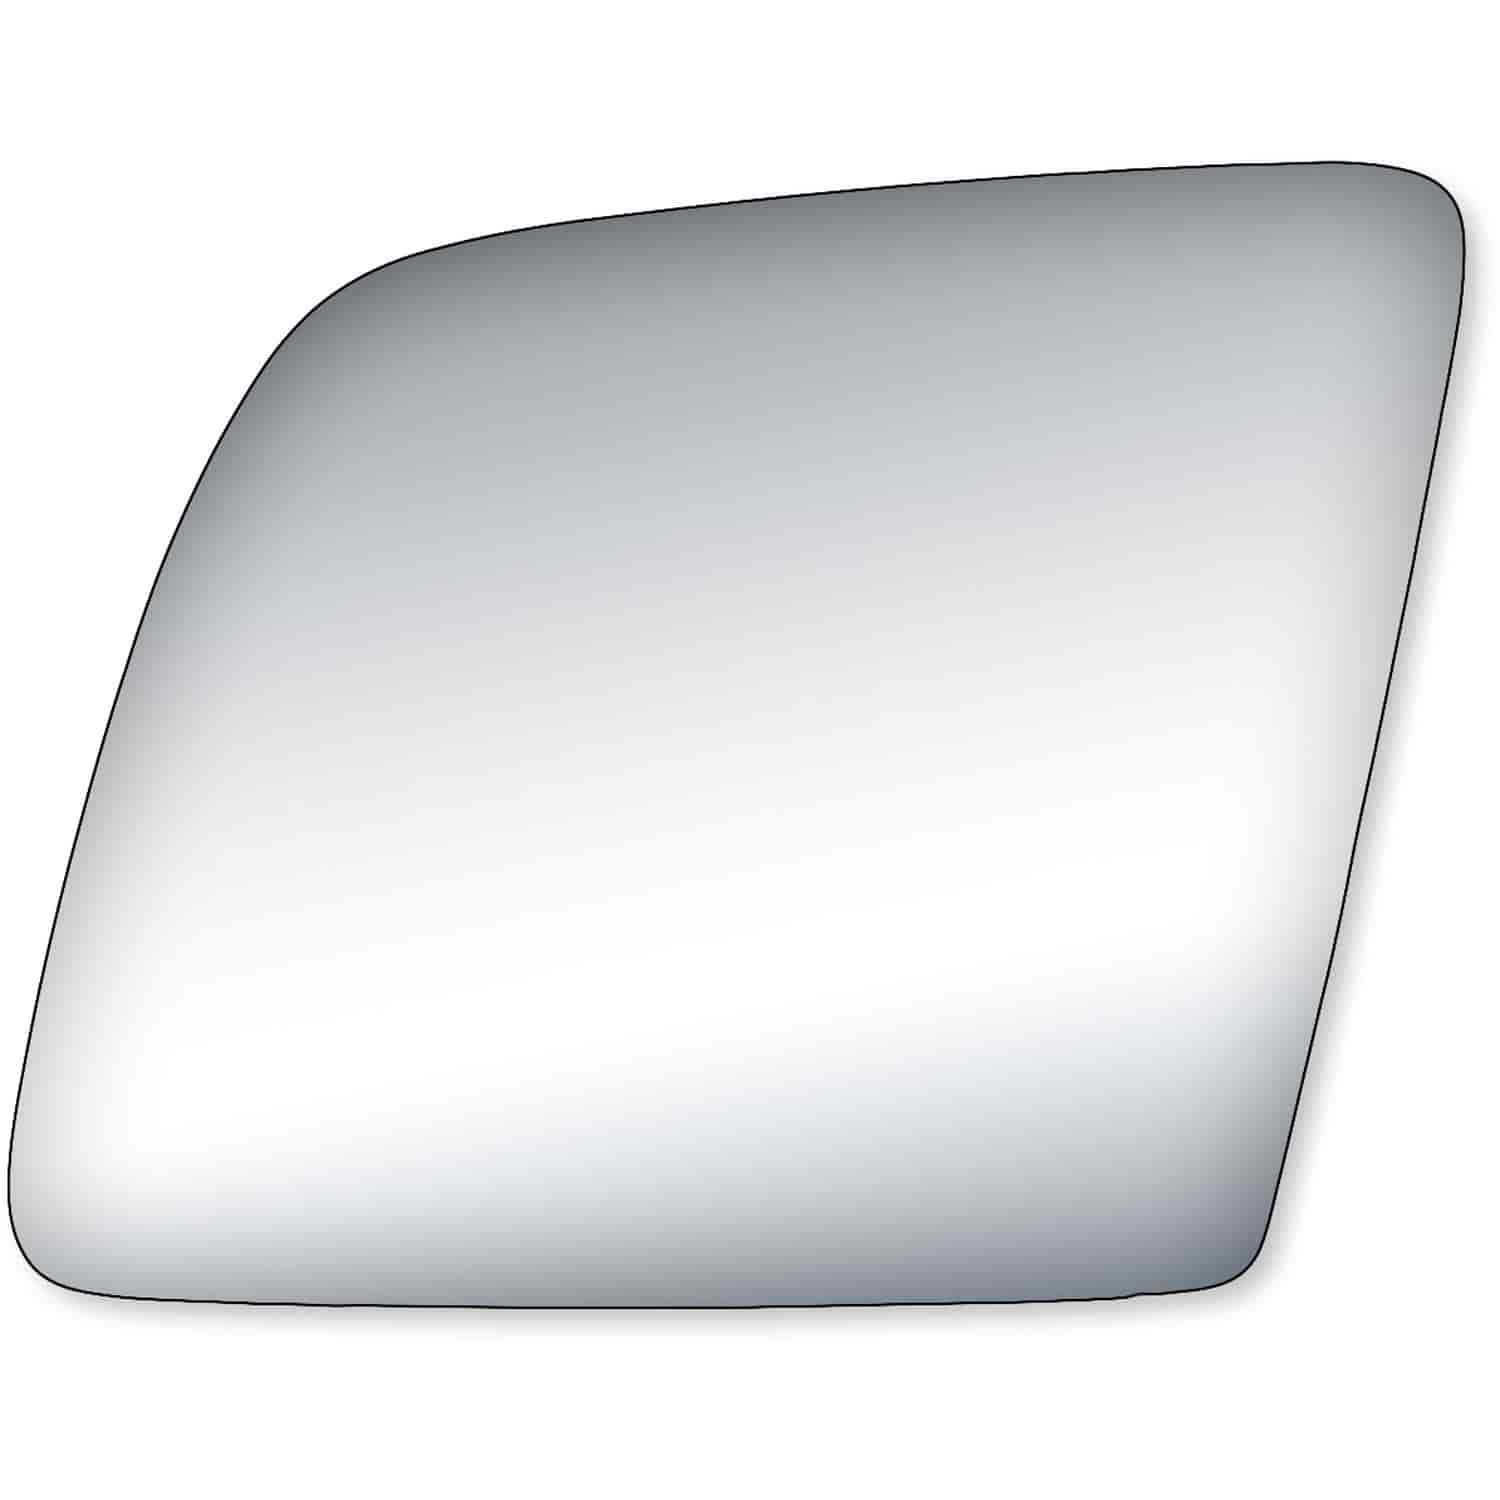 Replacement Glass for 92-0 6Econoline Van the glass